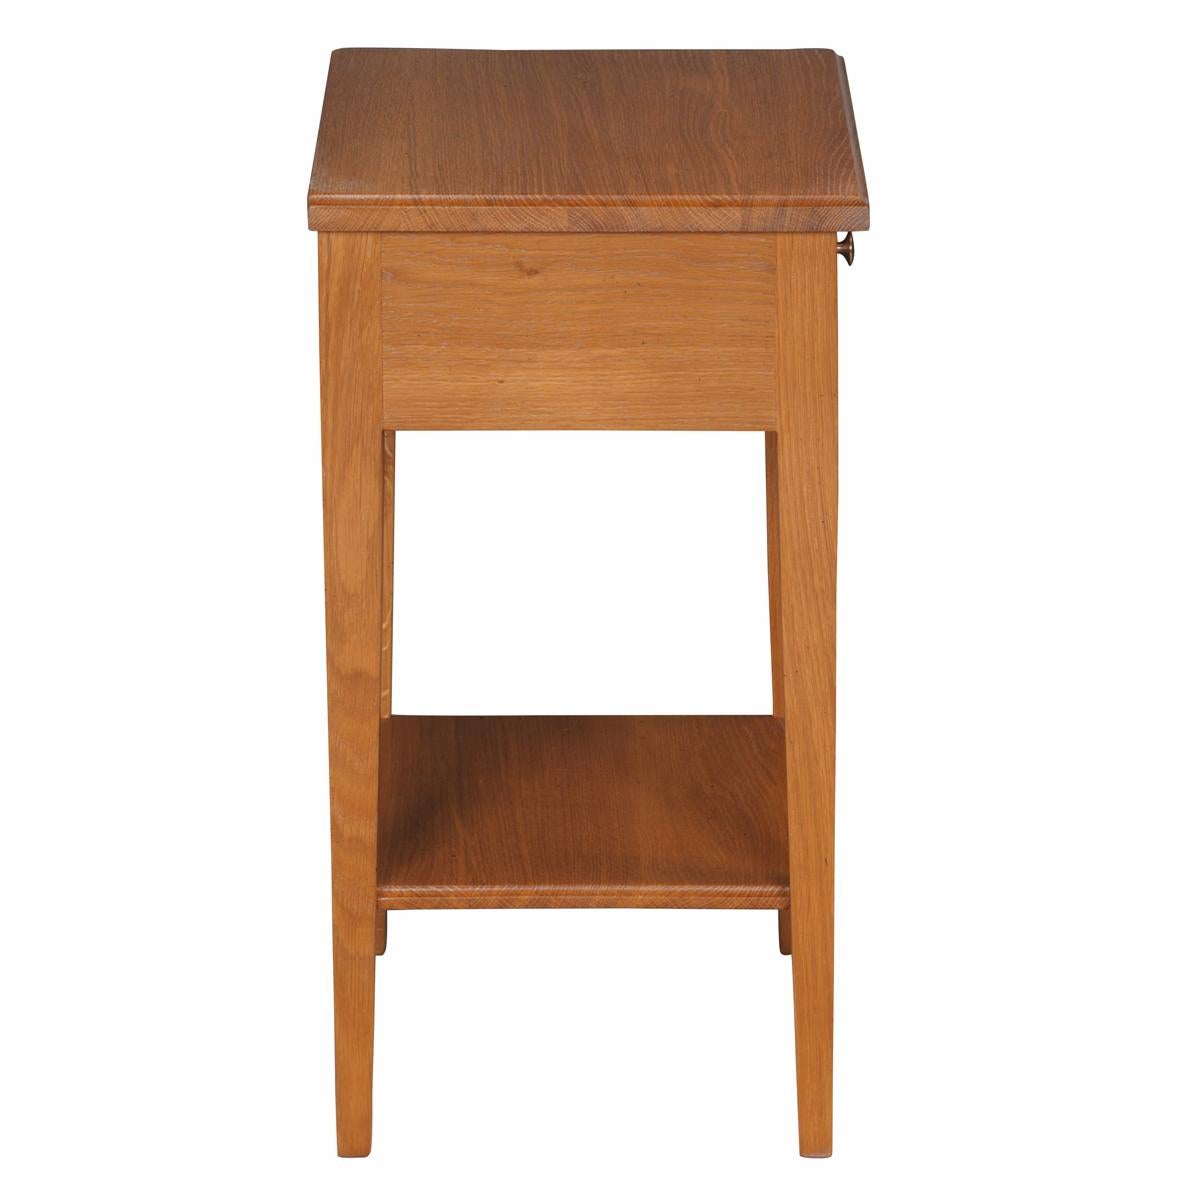 French Neo Classical Style Bedside Table in Solid Oak, 1 Drawer For Sale 1